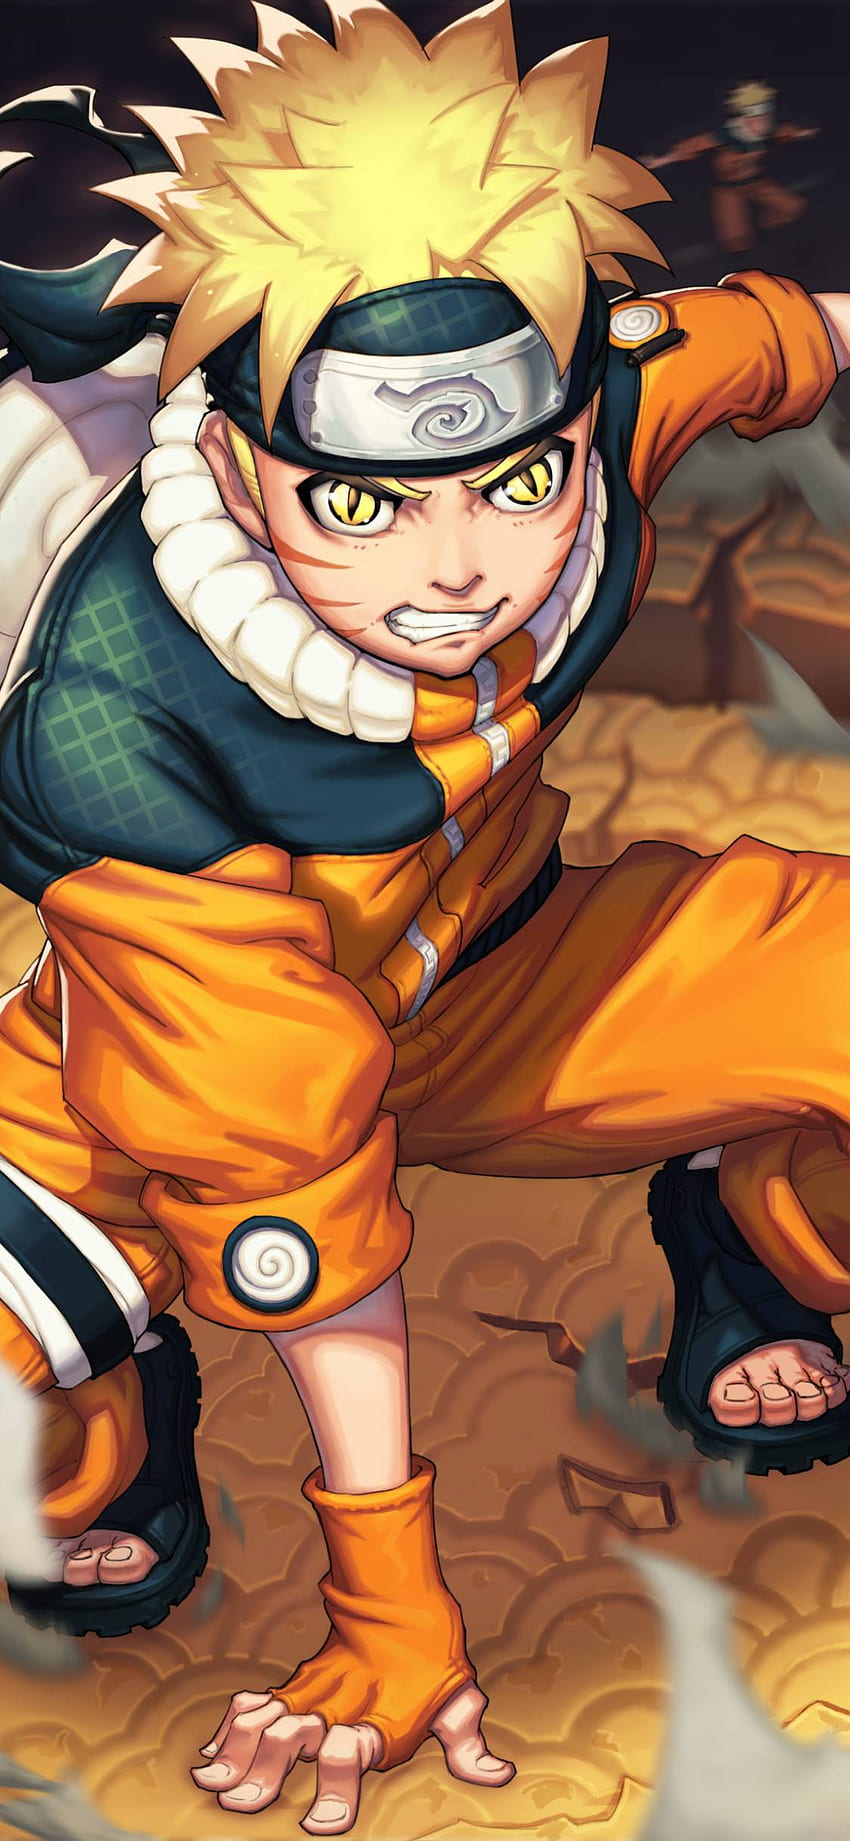 Naruto Uzumaki Art iPhone XS - Naruto Uzumaki Art iPhone XS: If you\'re a Naruto fan and an iPhone user, this is the perfect wallpaper for you! The Naruto Uzumaki Art iPhone XS wallpaper beautifully captures the essence of the beloved character. With its high-quality graphics and vibrant colors, the wallpaper will make you feel like Naruto himself is standing on your screen. Don\'t wait any longer, download this stunning wallpaper now and show off your love for Naruto!